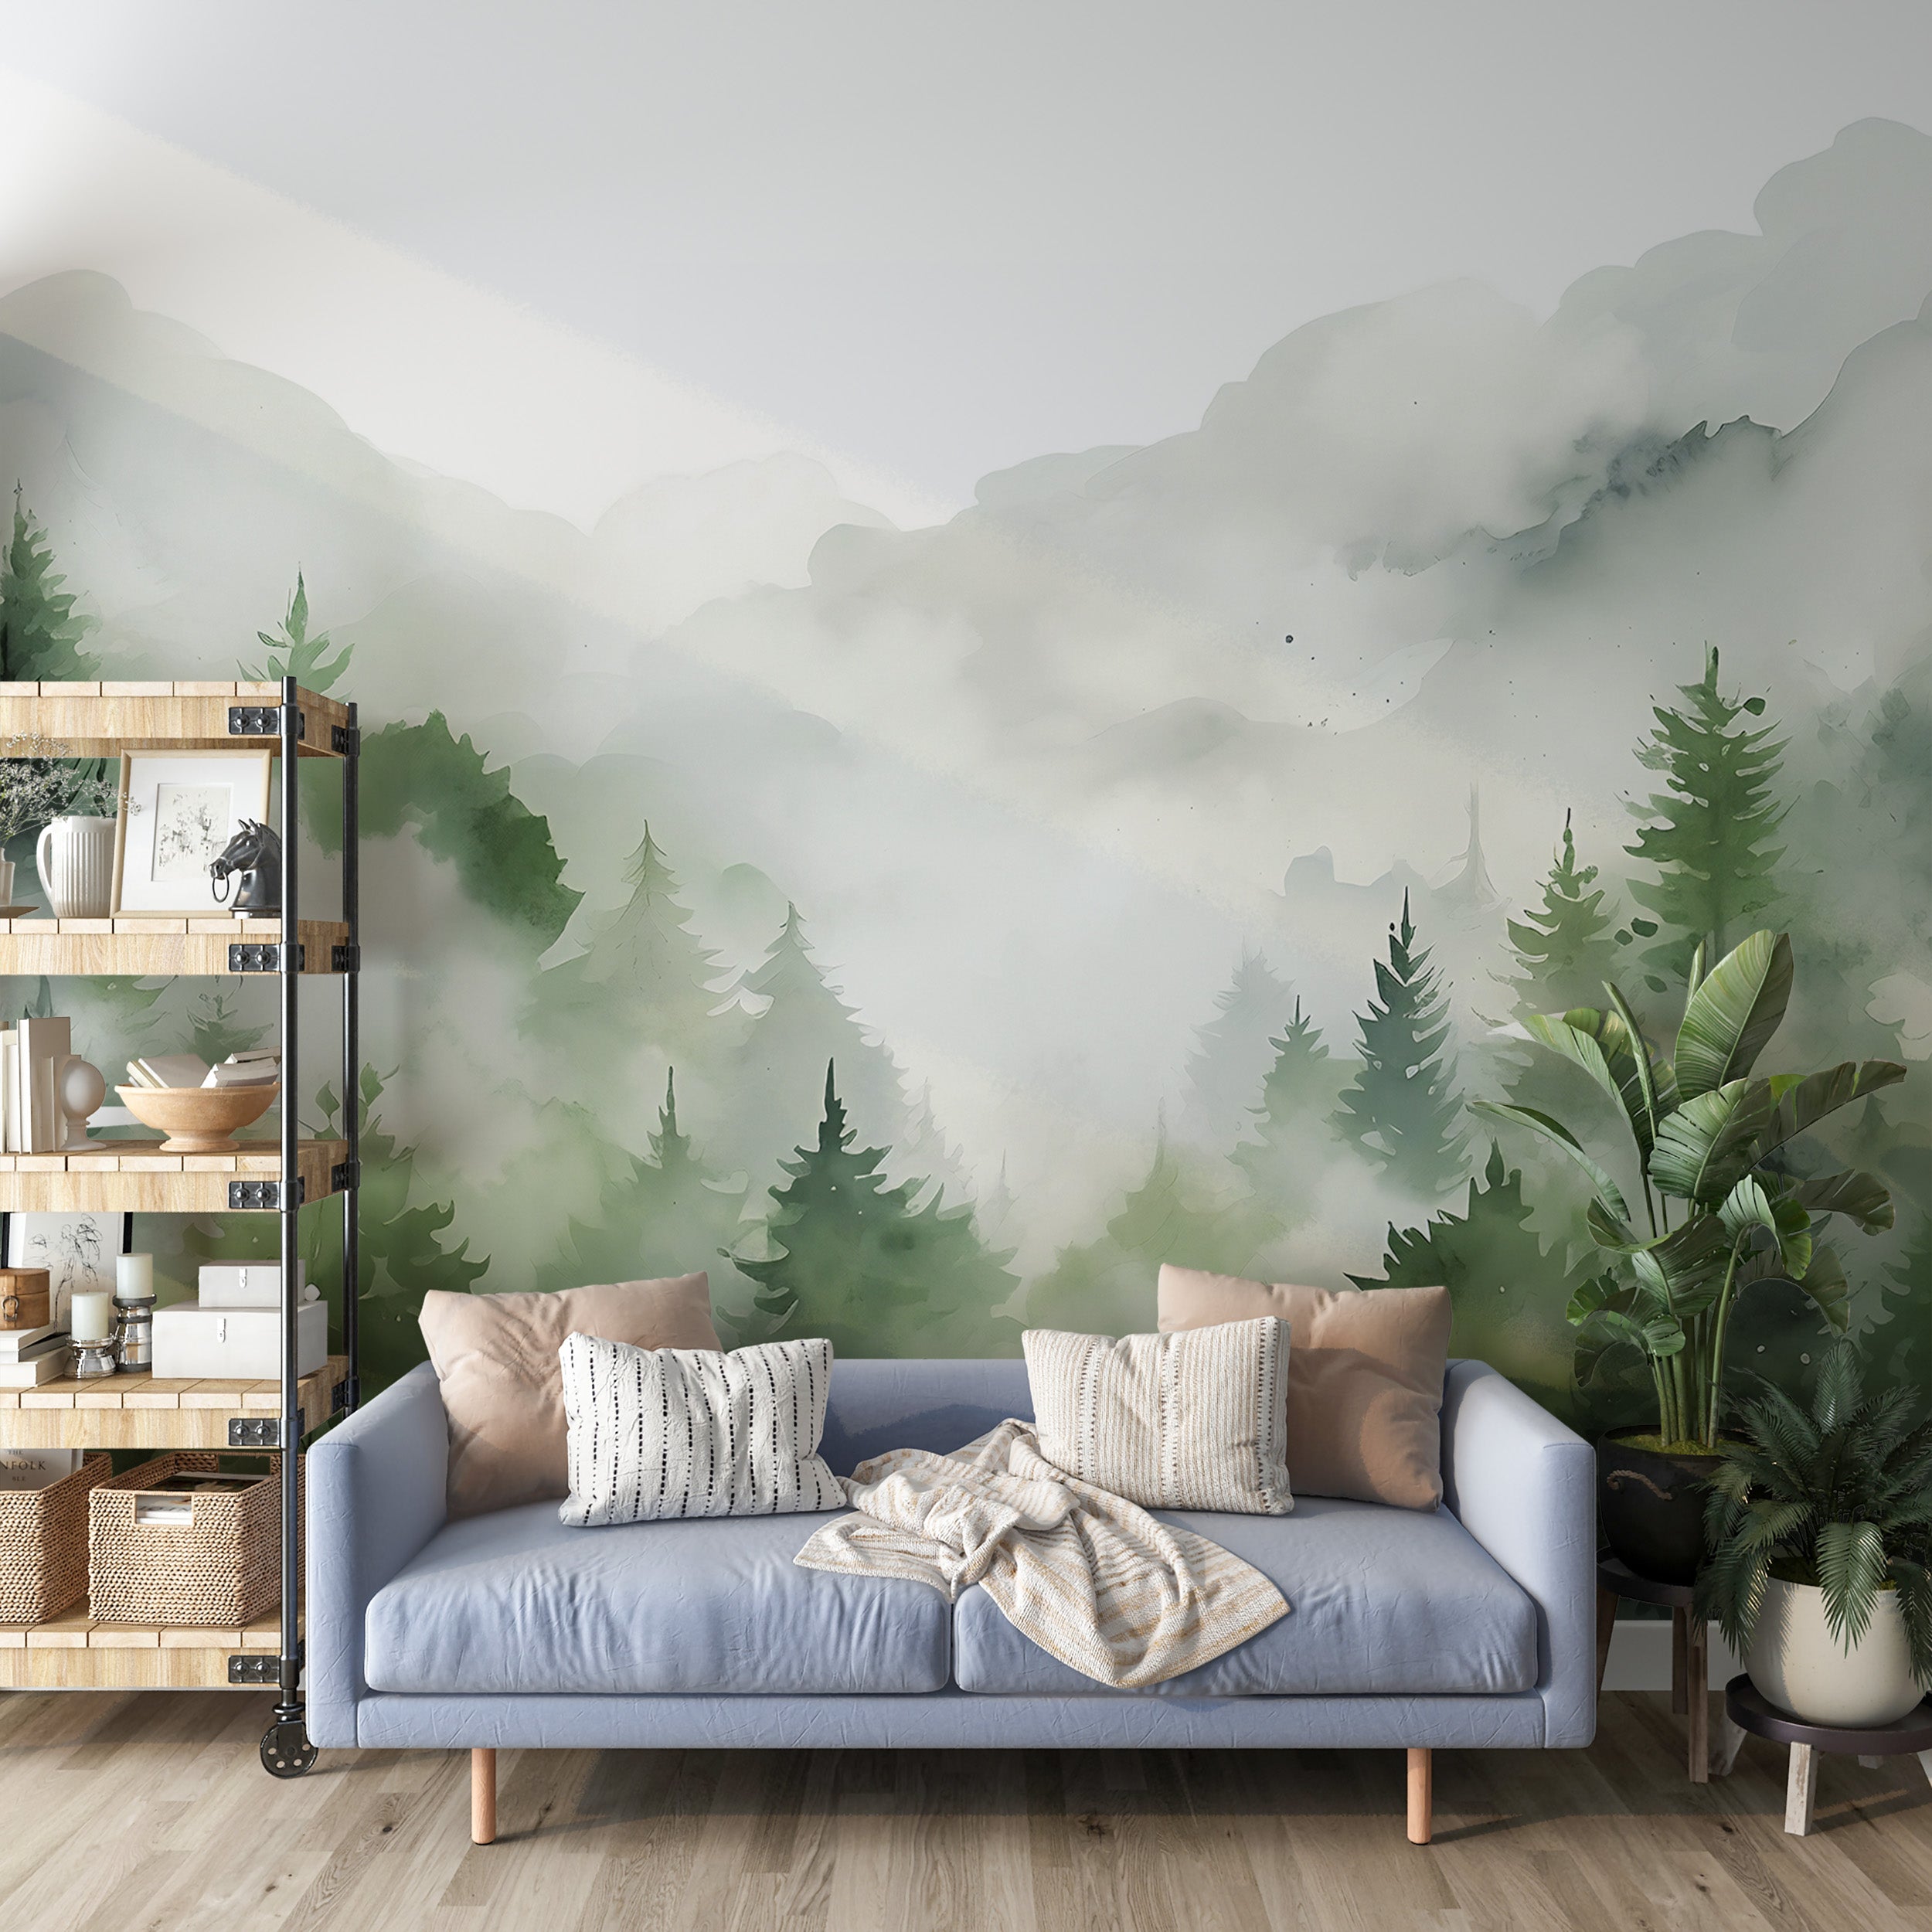 Invite Wonder with Nature-Infused Wall Decor